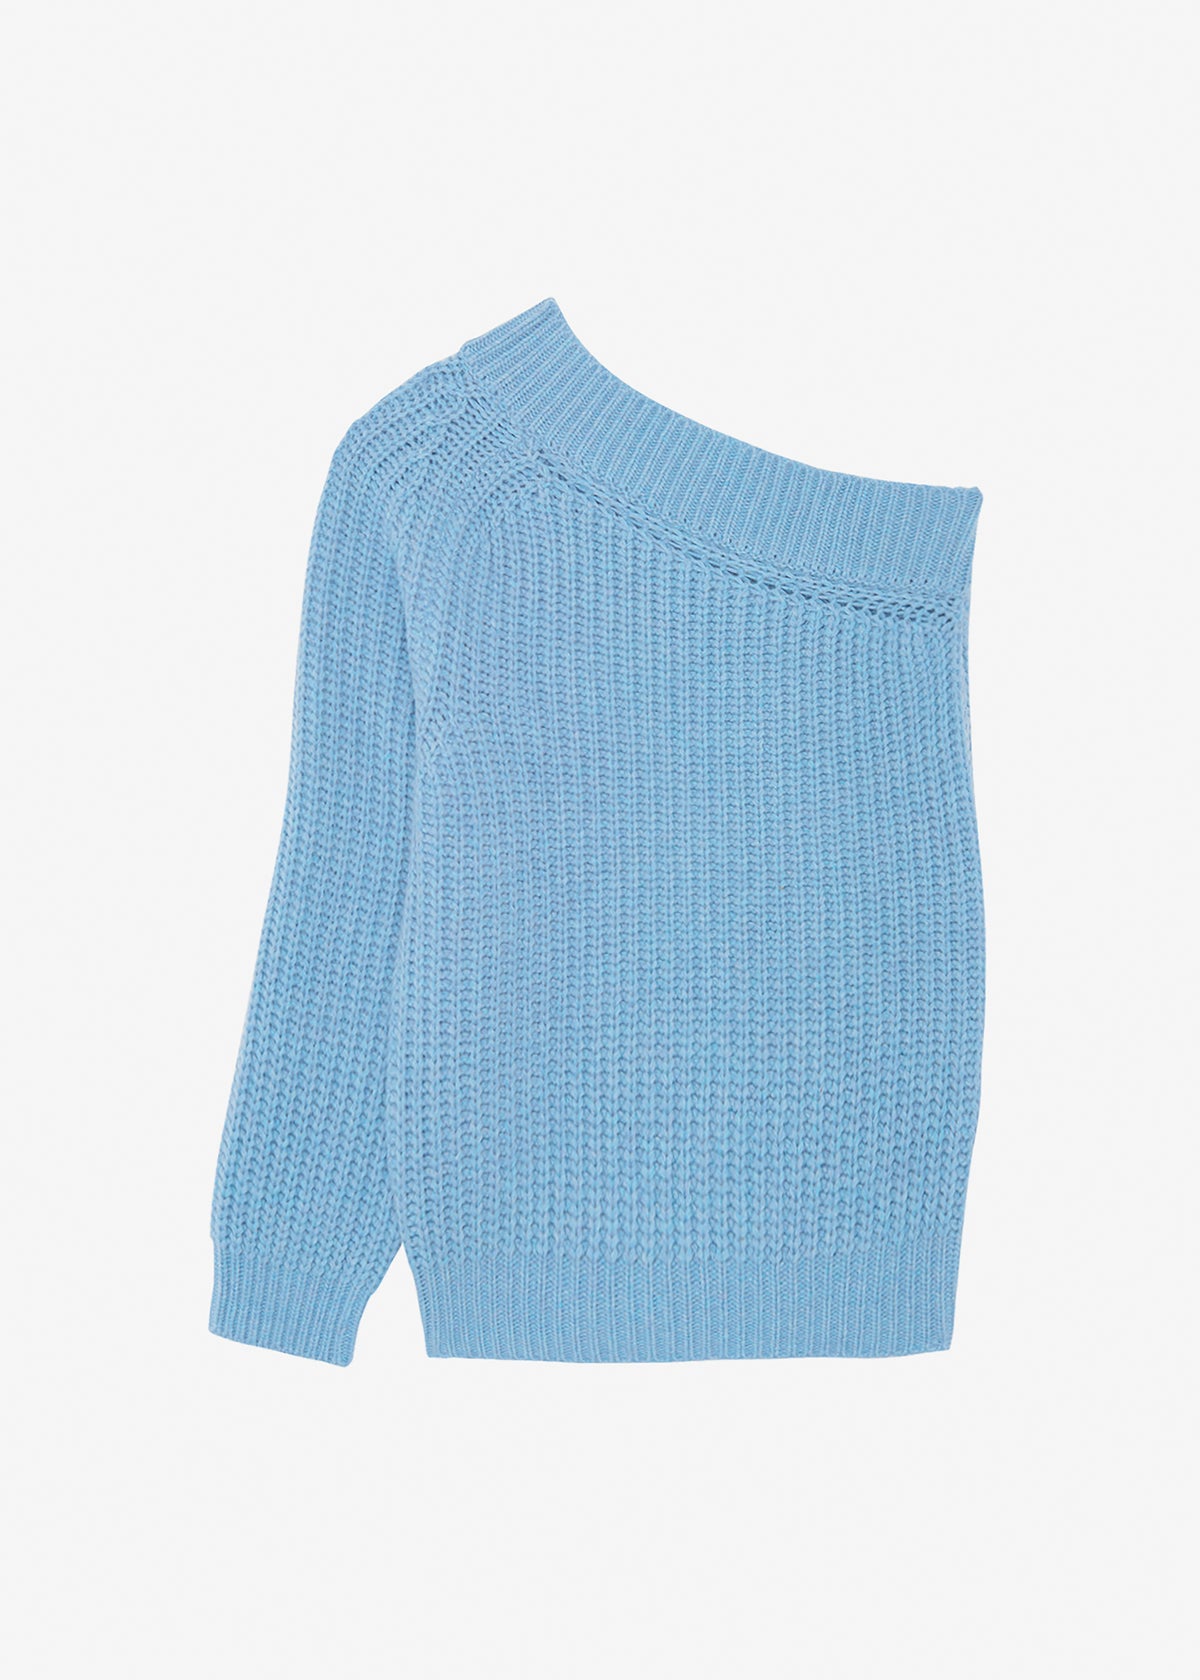 The Slouchy Denim Blue Cable Knit Top – Shop the Mint